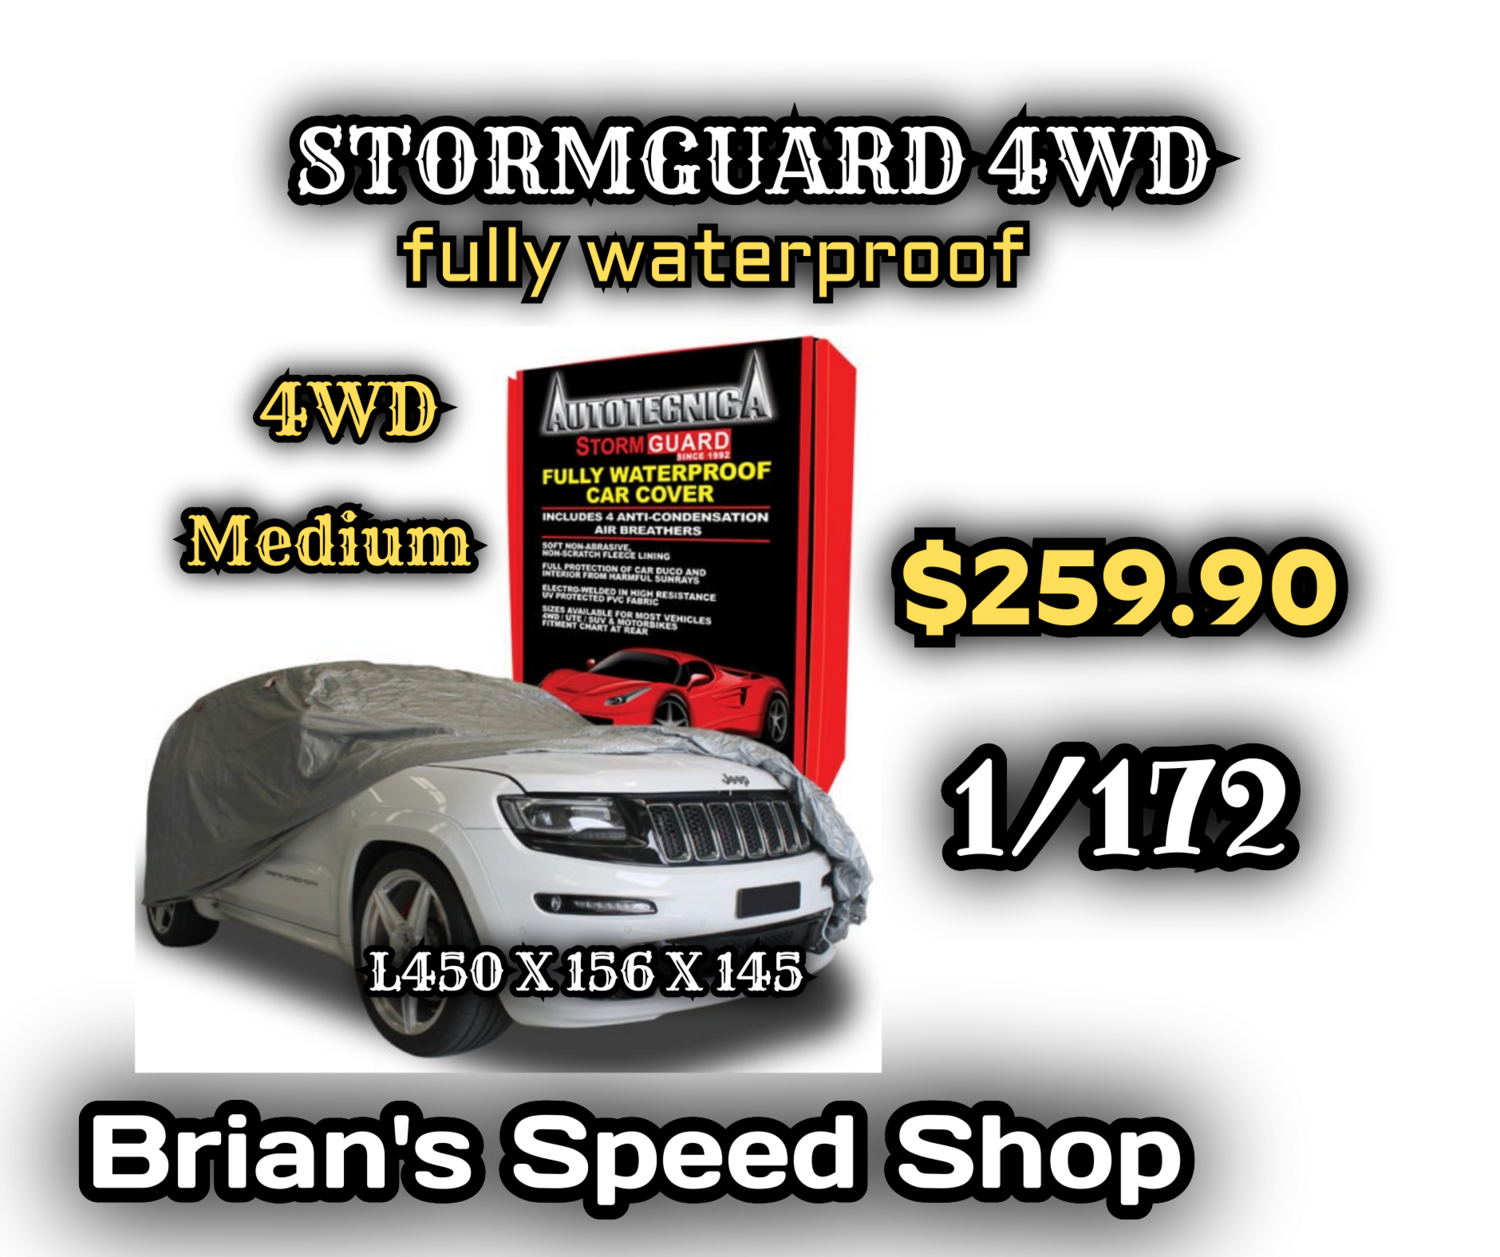 Stormguard  4WD   Large 1/172 fully waterproof Car Covers Free Shipping  $259.90